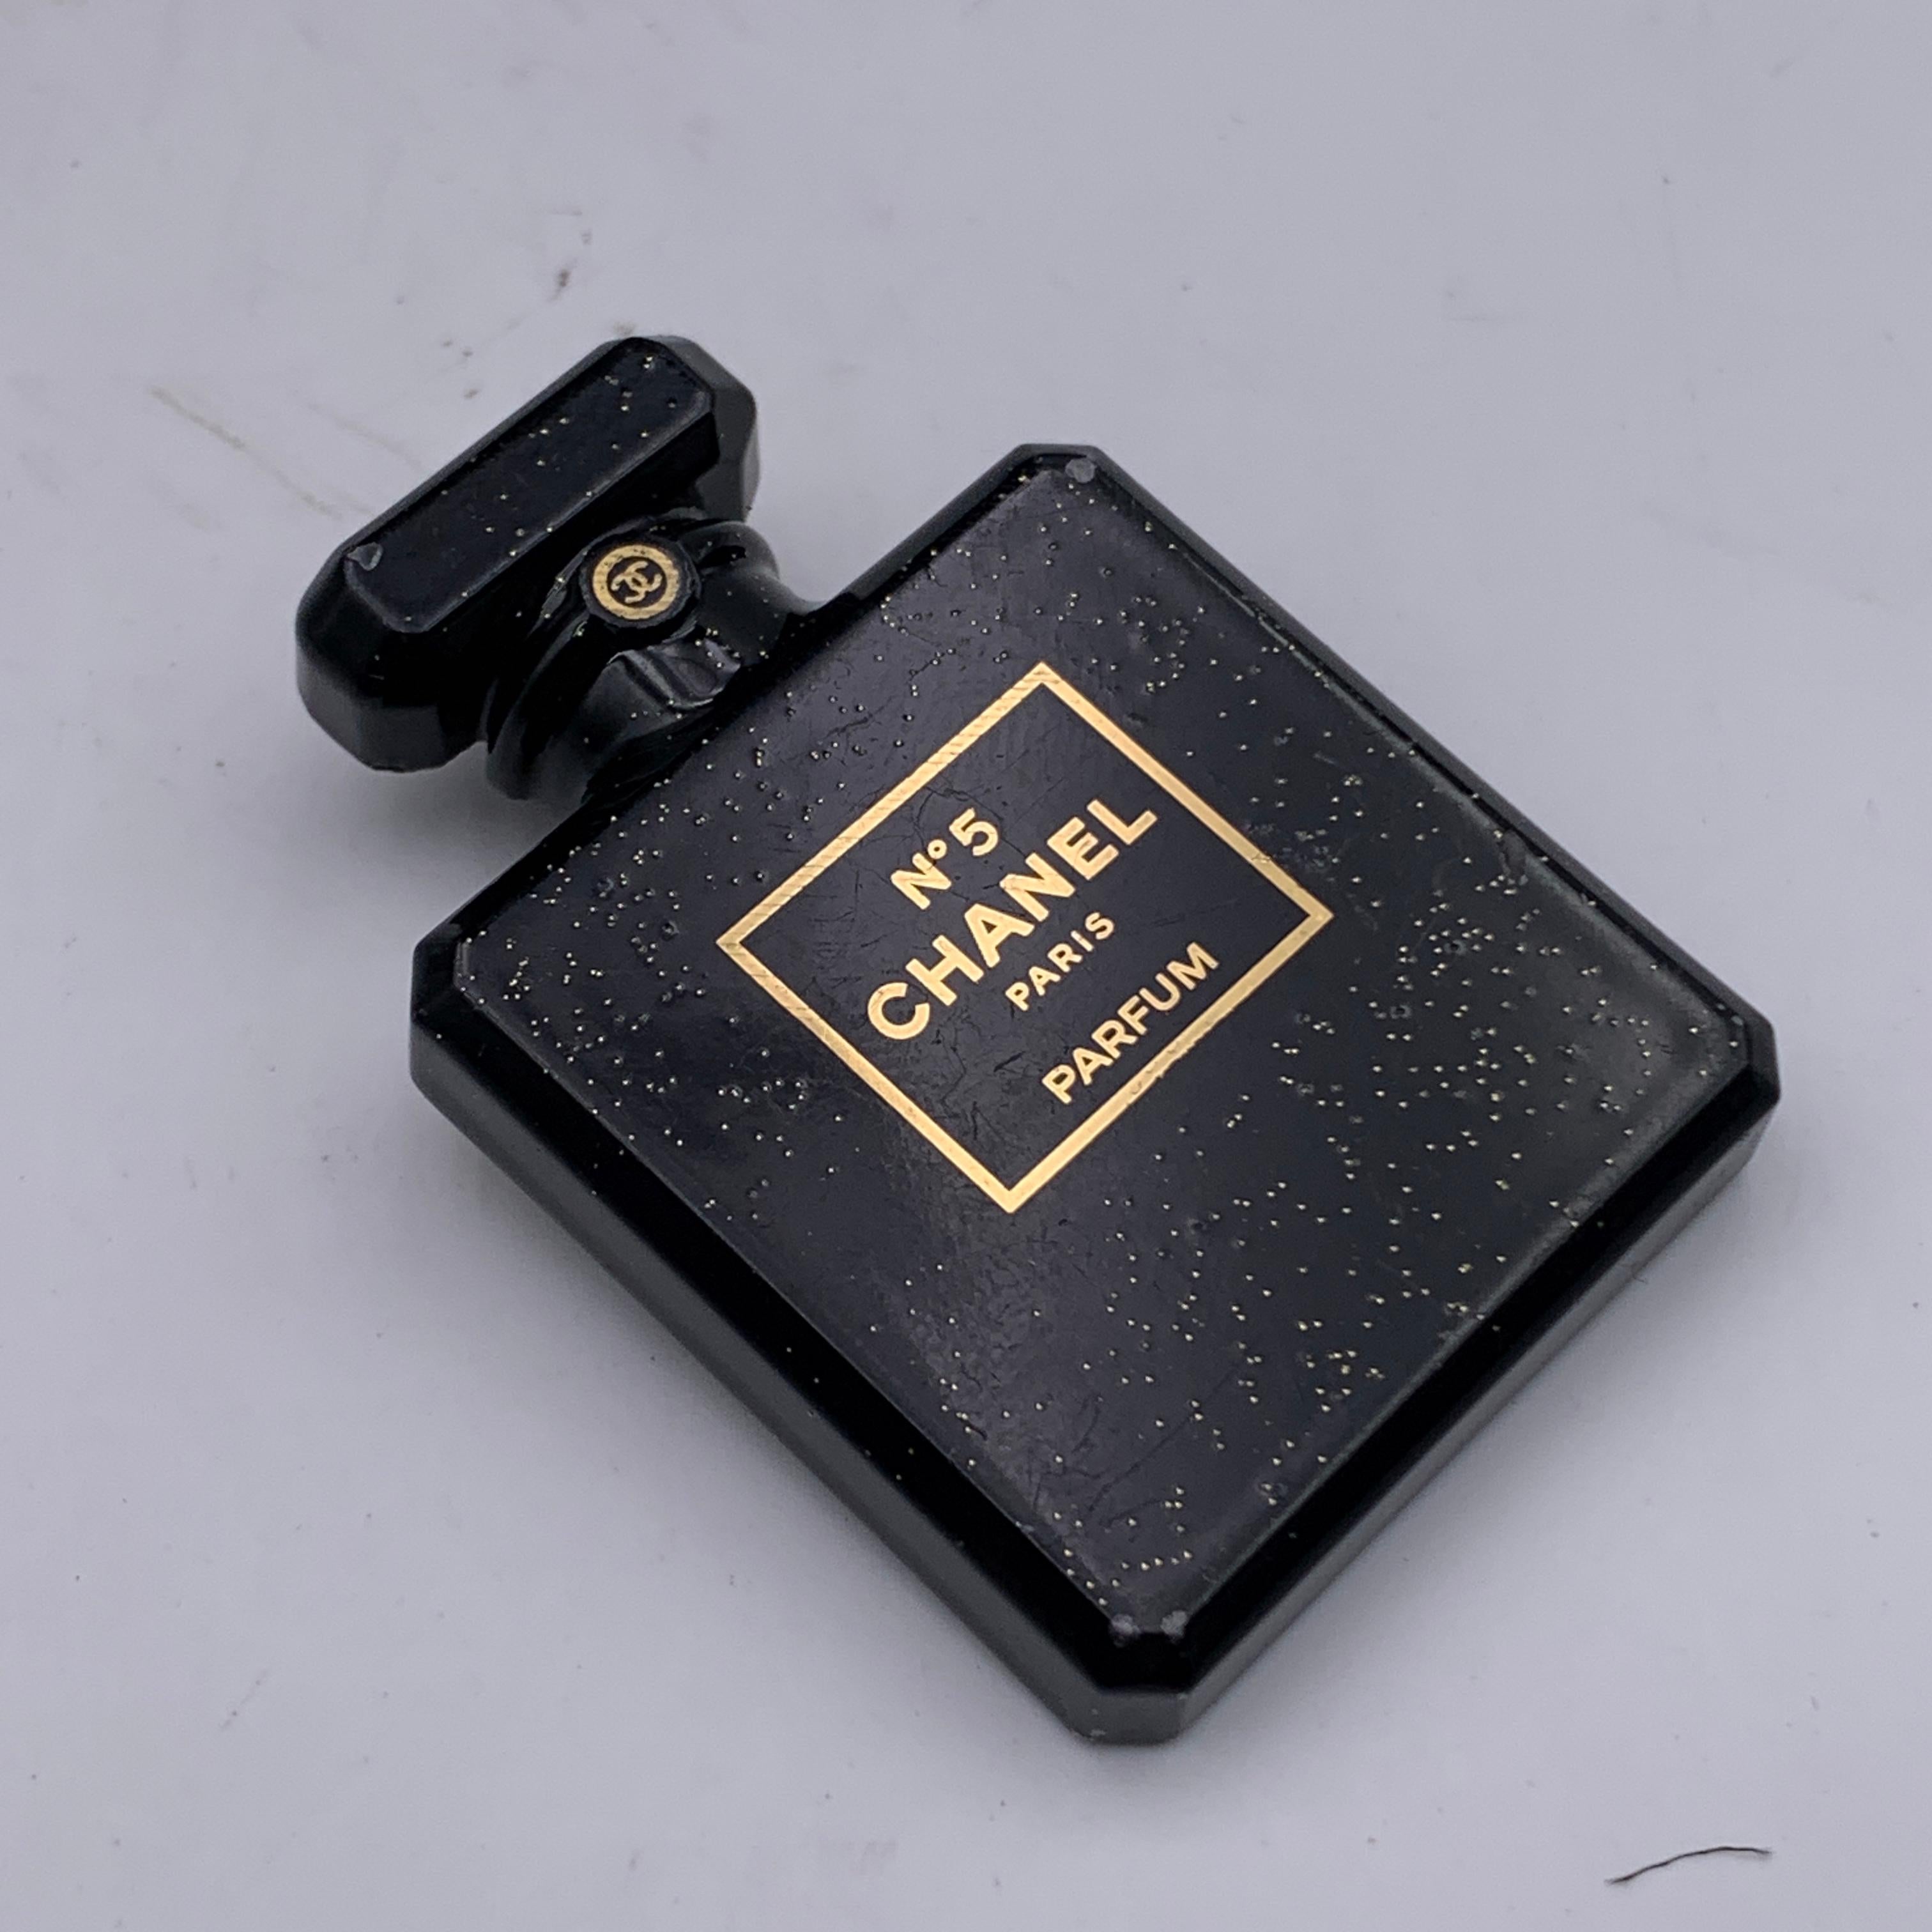 Chanel black brooch from the 2021 Fall/Winter collection, shaped as the iconic Chanel N°5 Parfum bottle. Black resin accented with gold metal glitter. Safety pin closure. 'Chanel - U21 CC K - Made in France' oval hallmark on the back. Measurements: